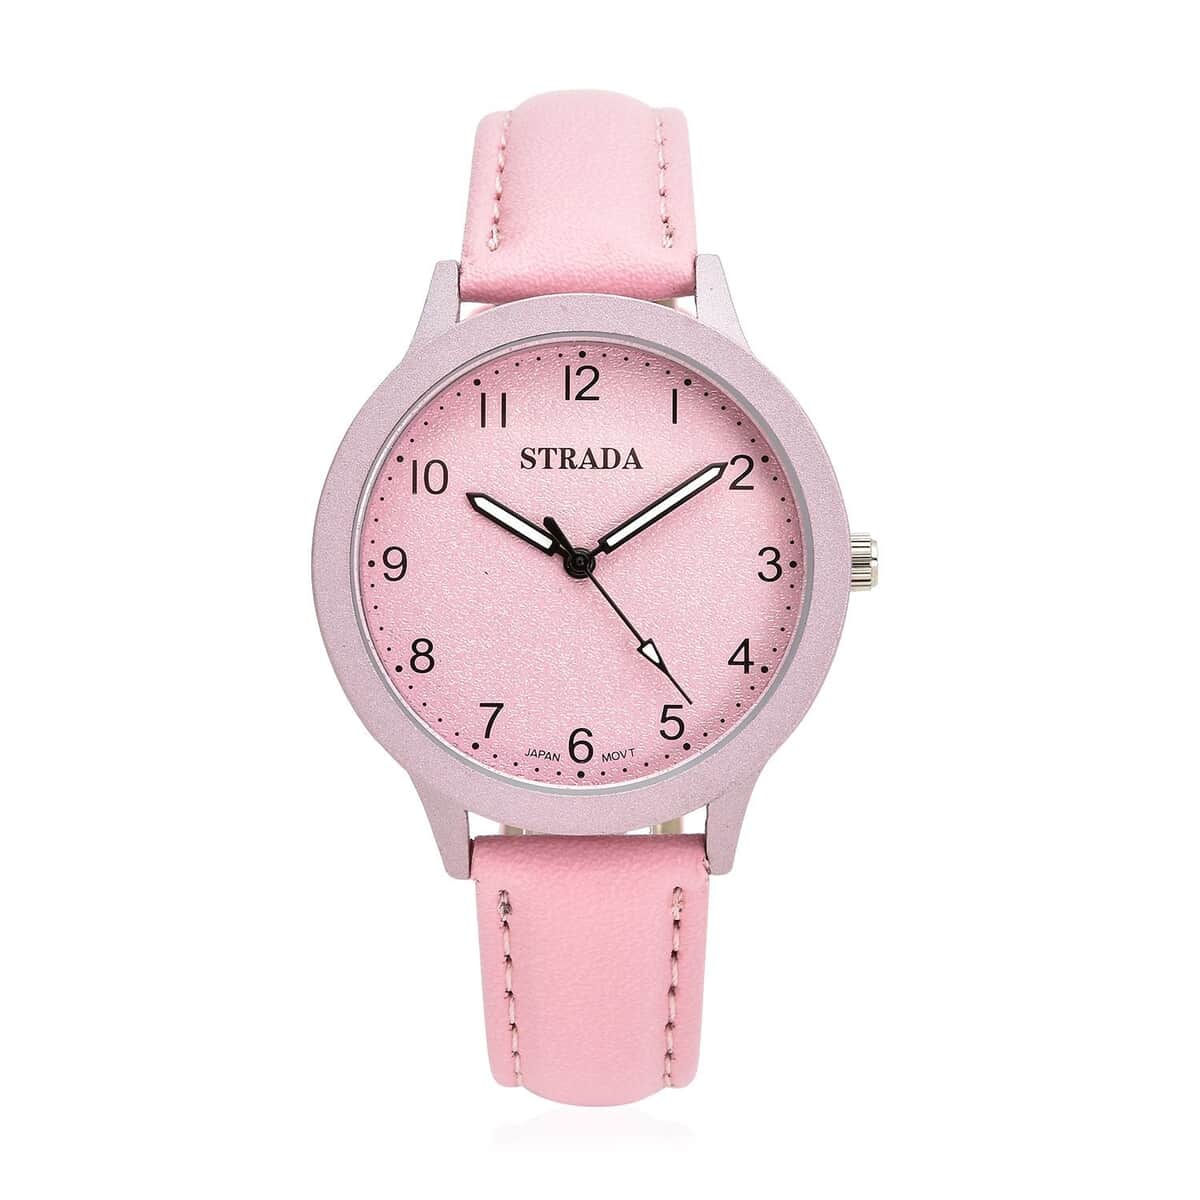 Strada Japanese Movement Watch with Pink Faux Leather Strap (36.32 mm) (5.75-7.75 Inches) image number 0